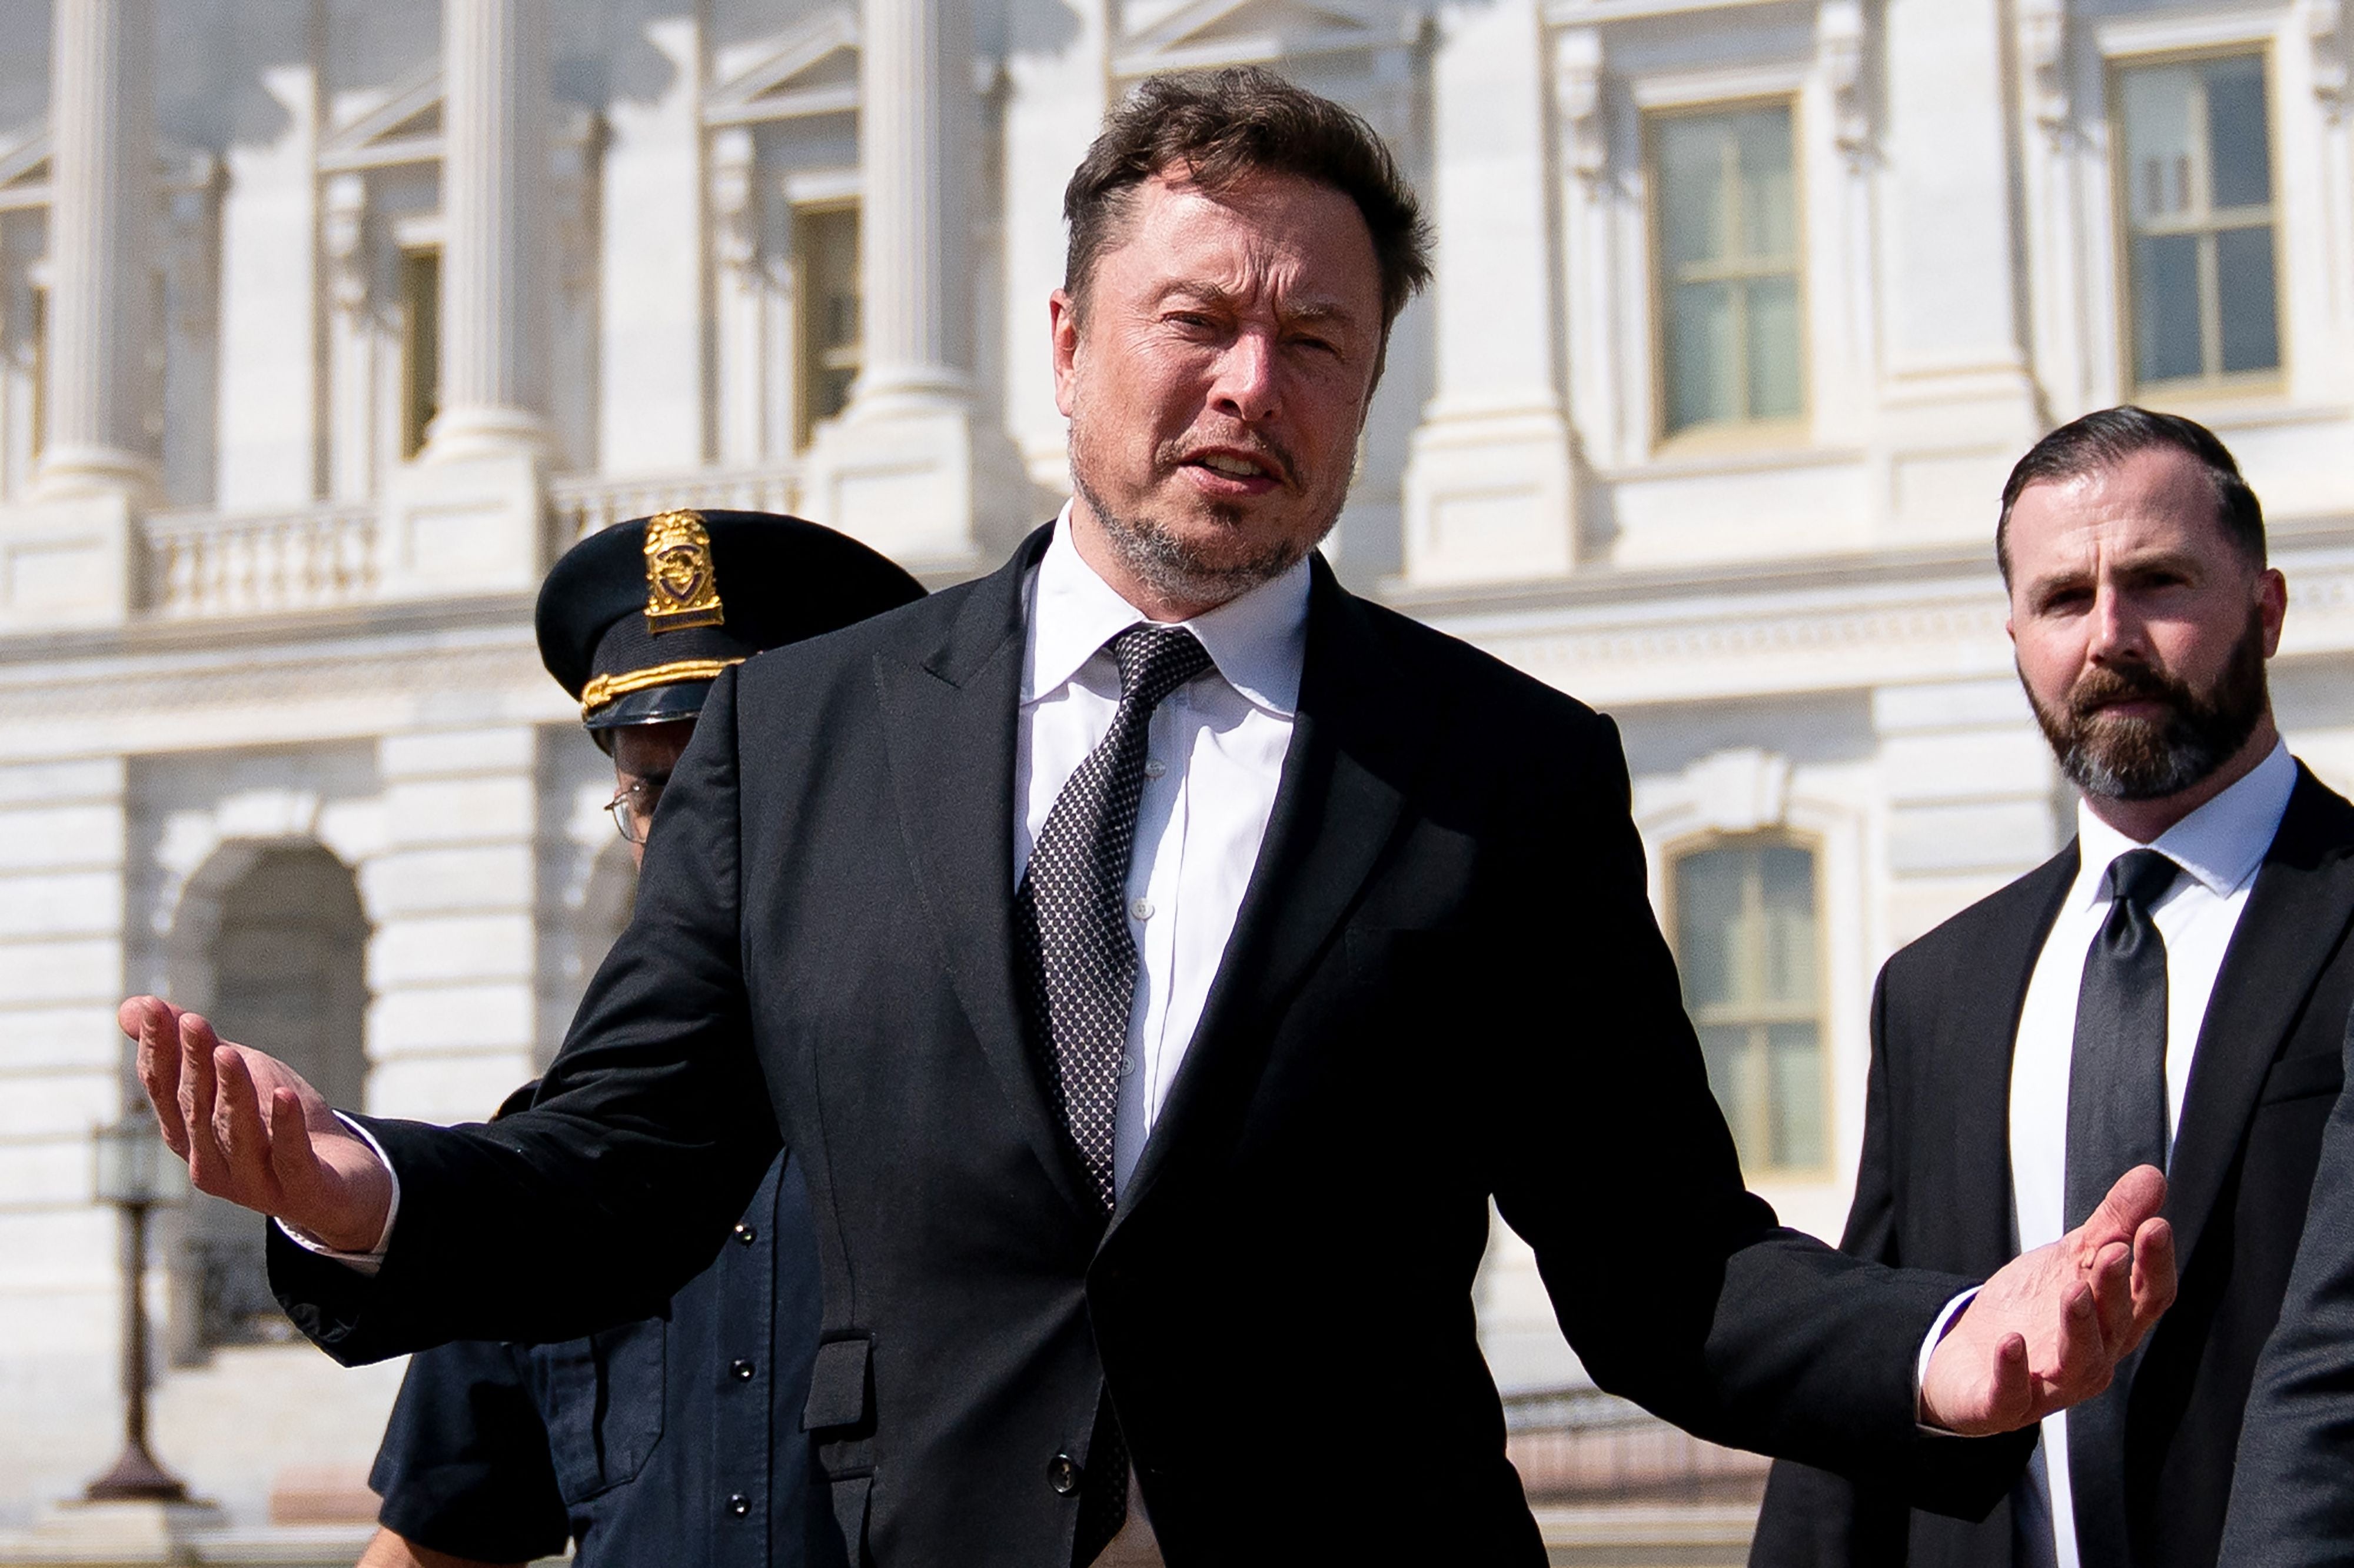 Elon Musk allegedly falsely claimed a California student was involved in a neo-Nazi street fight